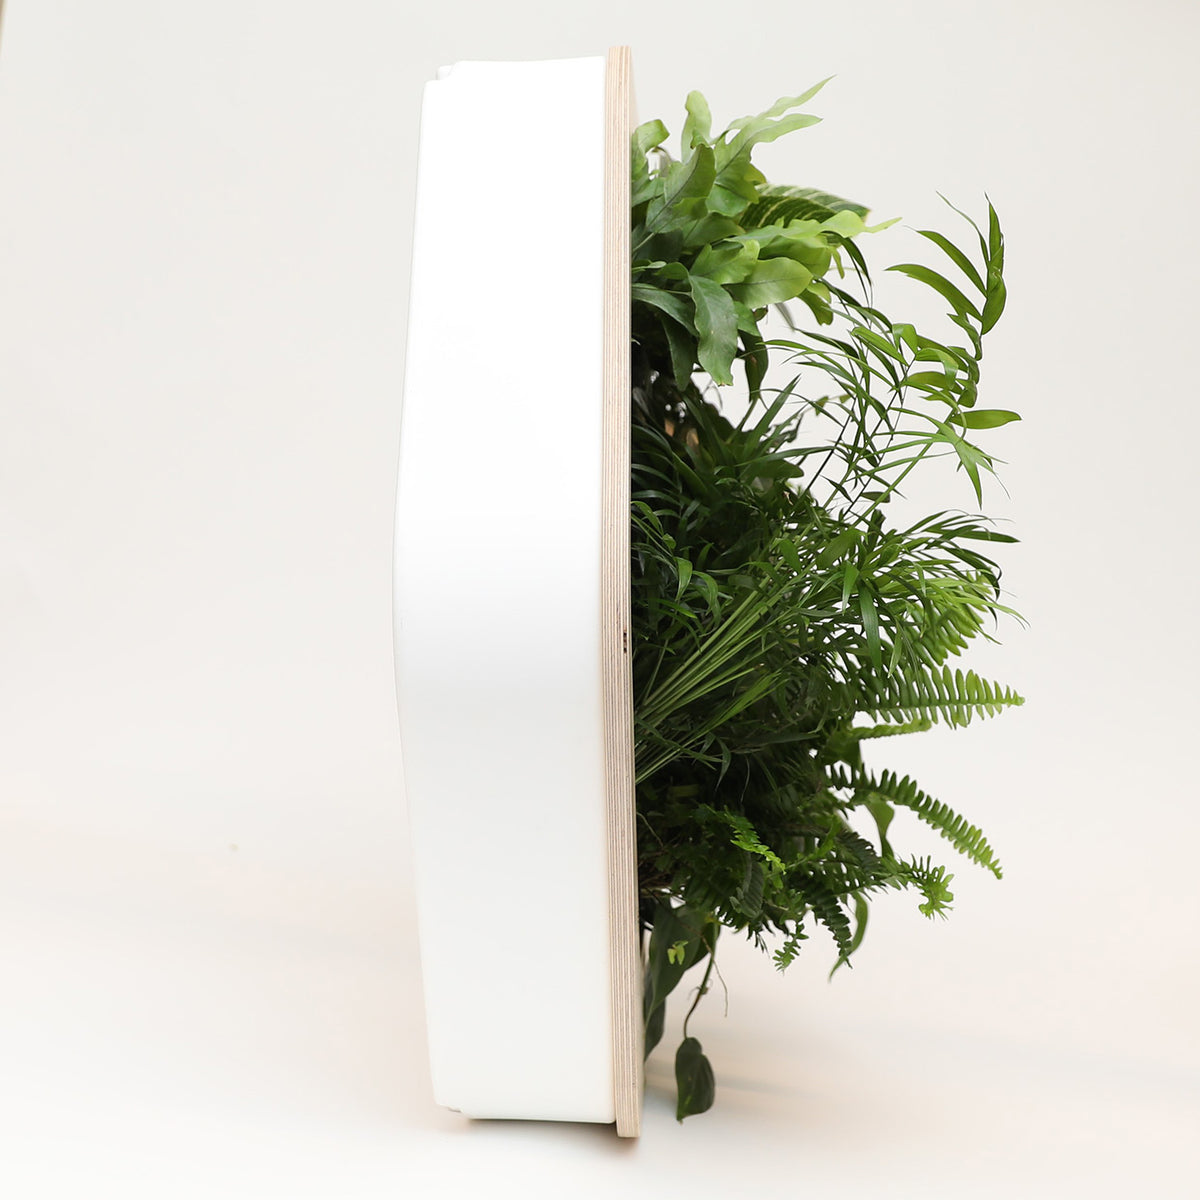 Growmeo x SFMOMA Living Wall assortment, wood frame and lively plants, side view.